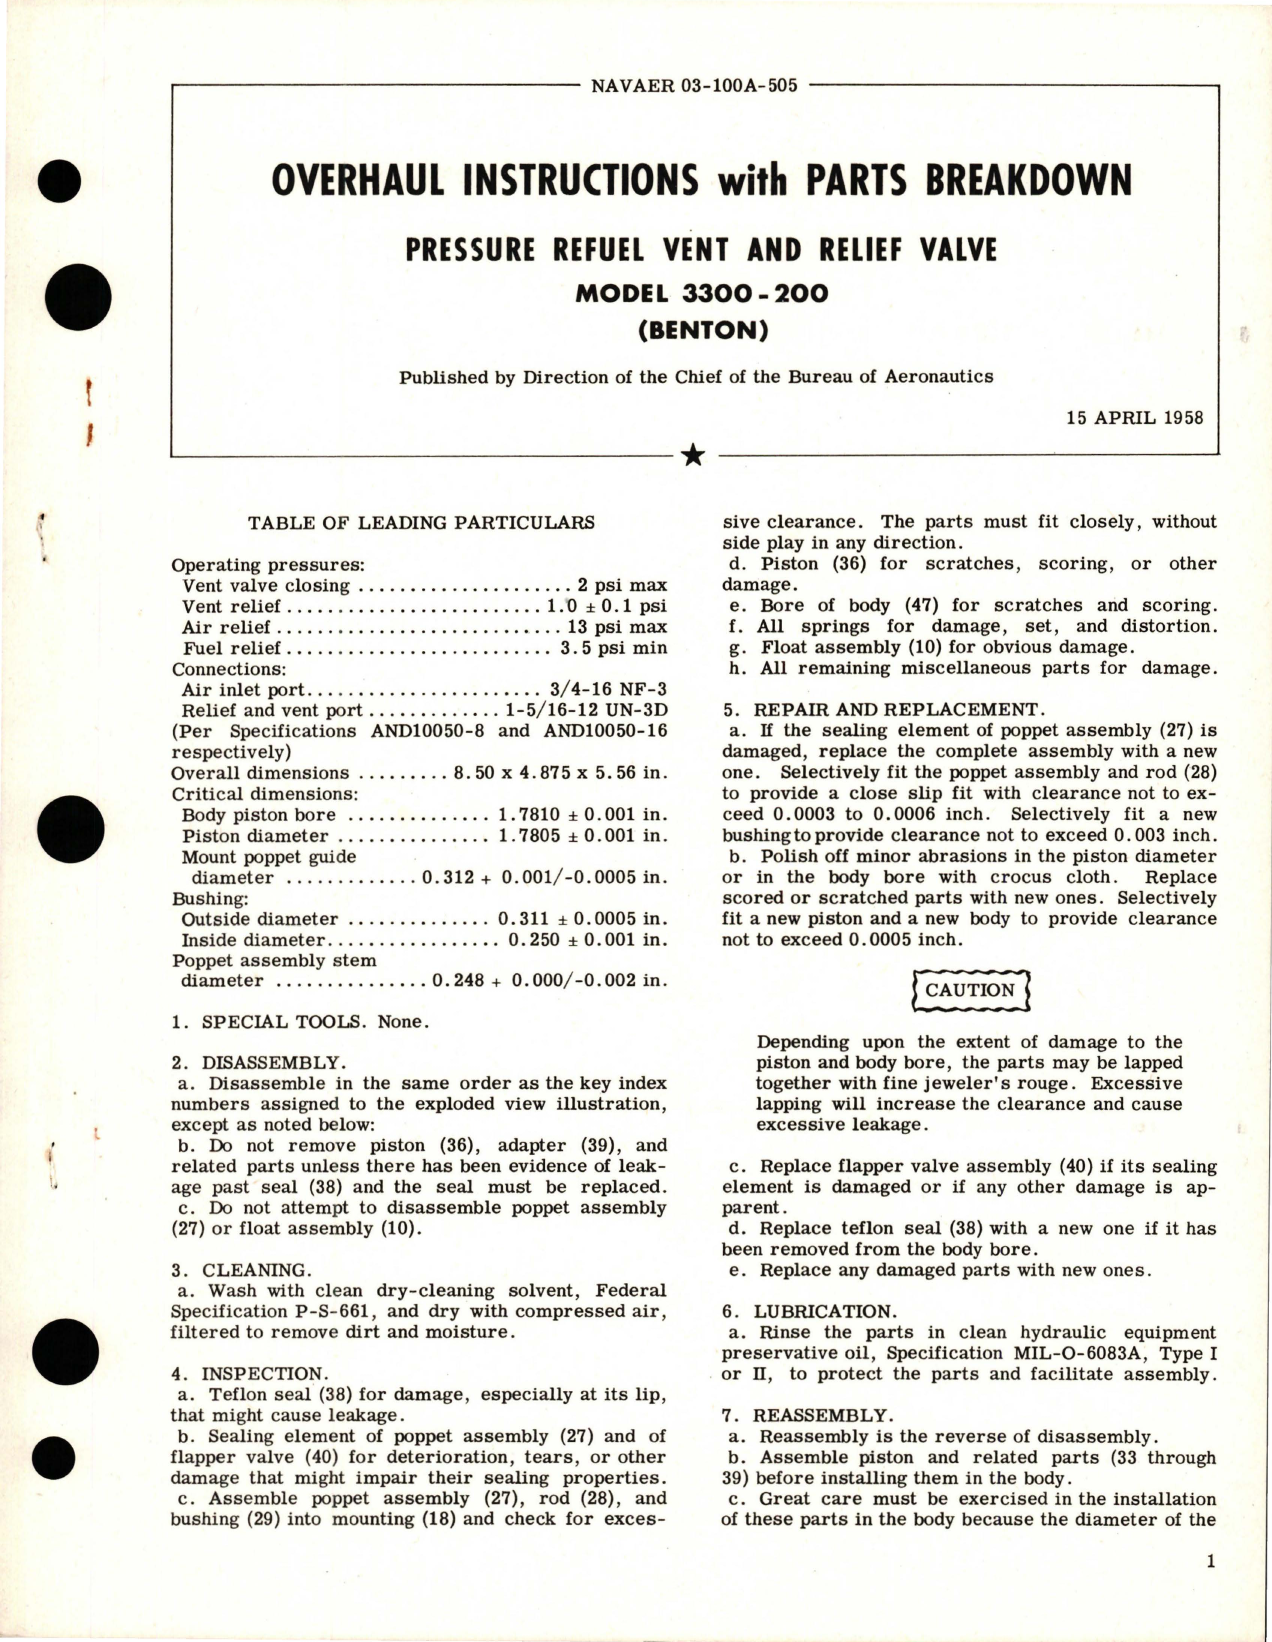 Sample page 1 from AirCorps Library document: Overhaul Instructions with Parts Breakdown for Pressure Refuel Vent and Relief Valve - Model 3300-200 